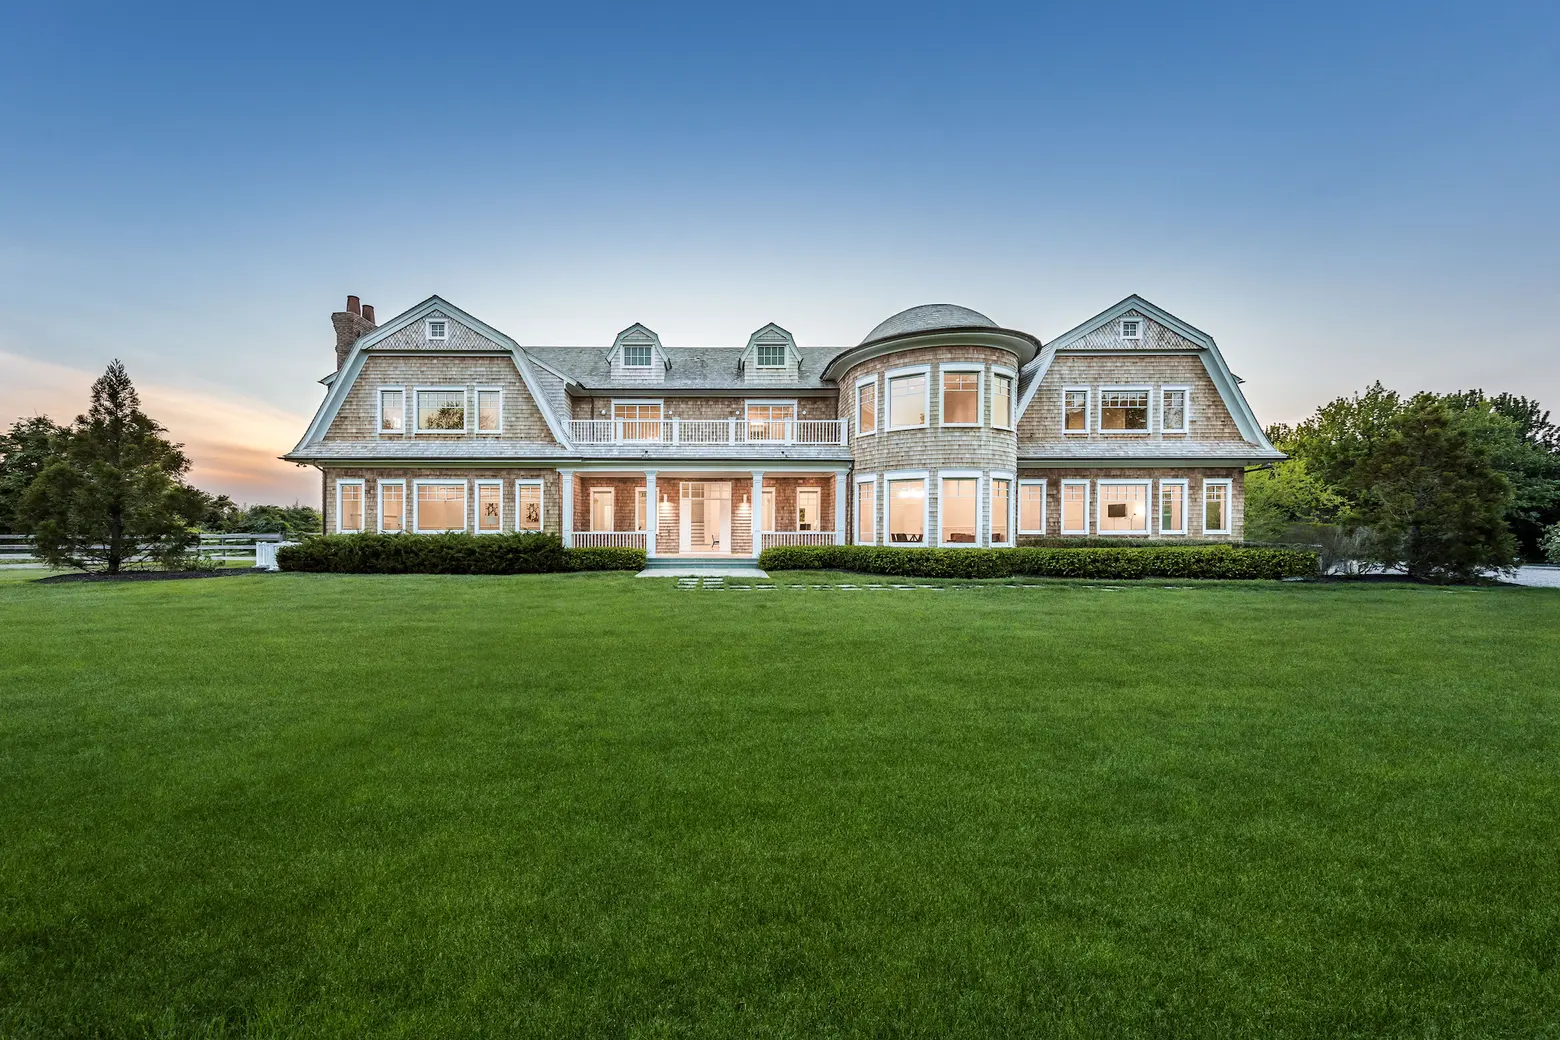 This $19M Southampton mansion has a massive indoor pool and basketball court